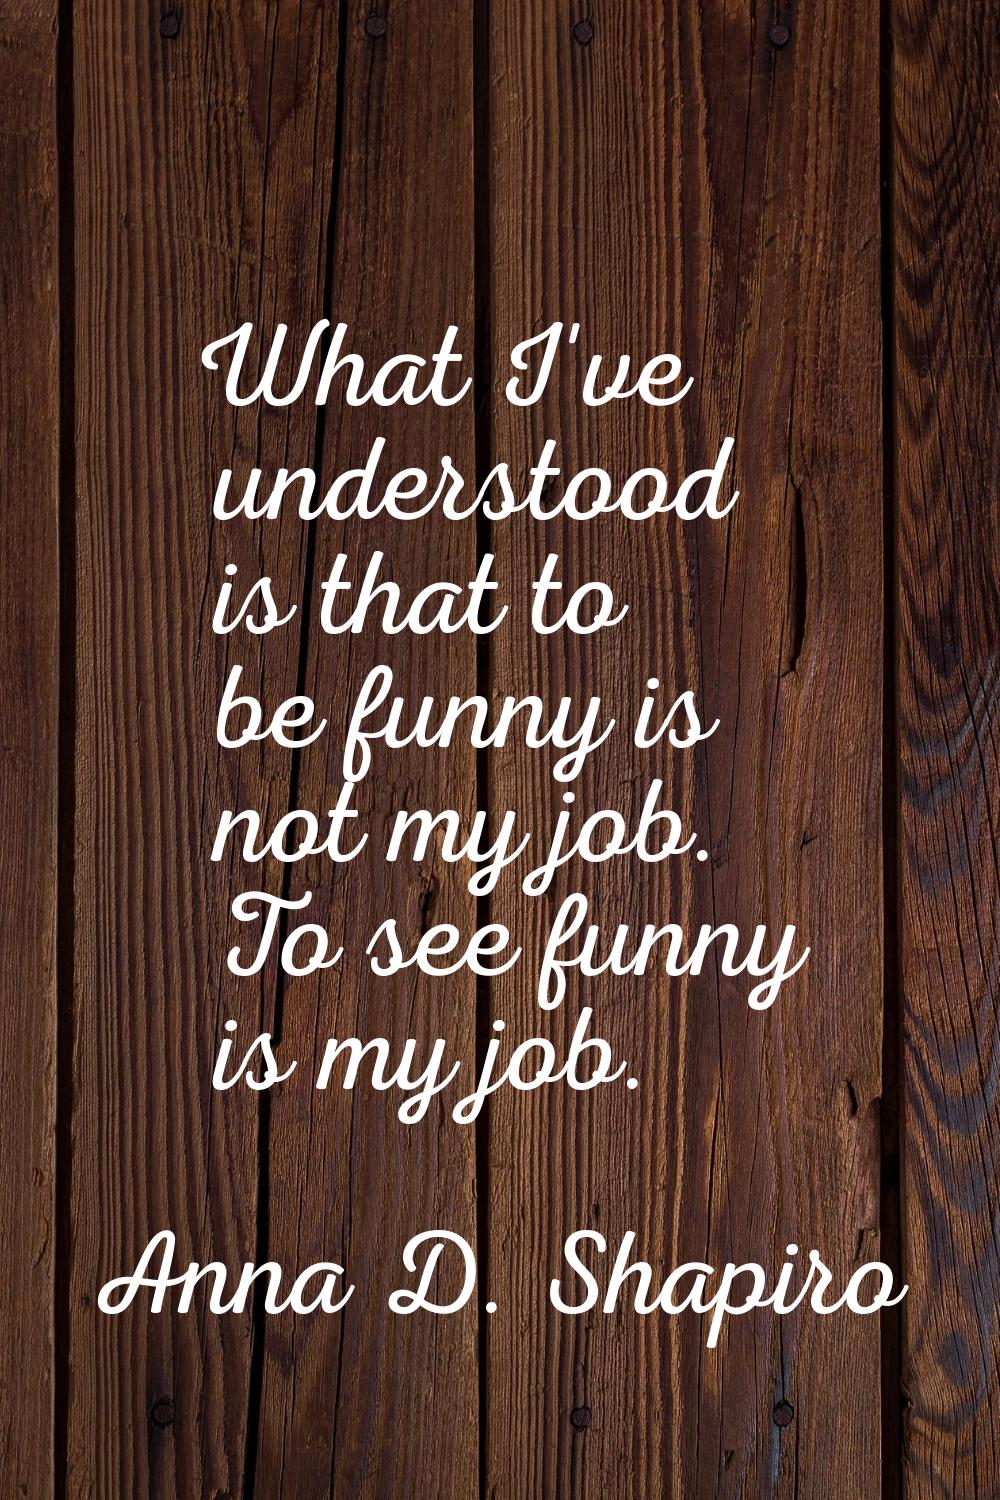 What I've understood is that to be funny is not my job. To see funny is my job.